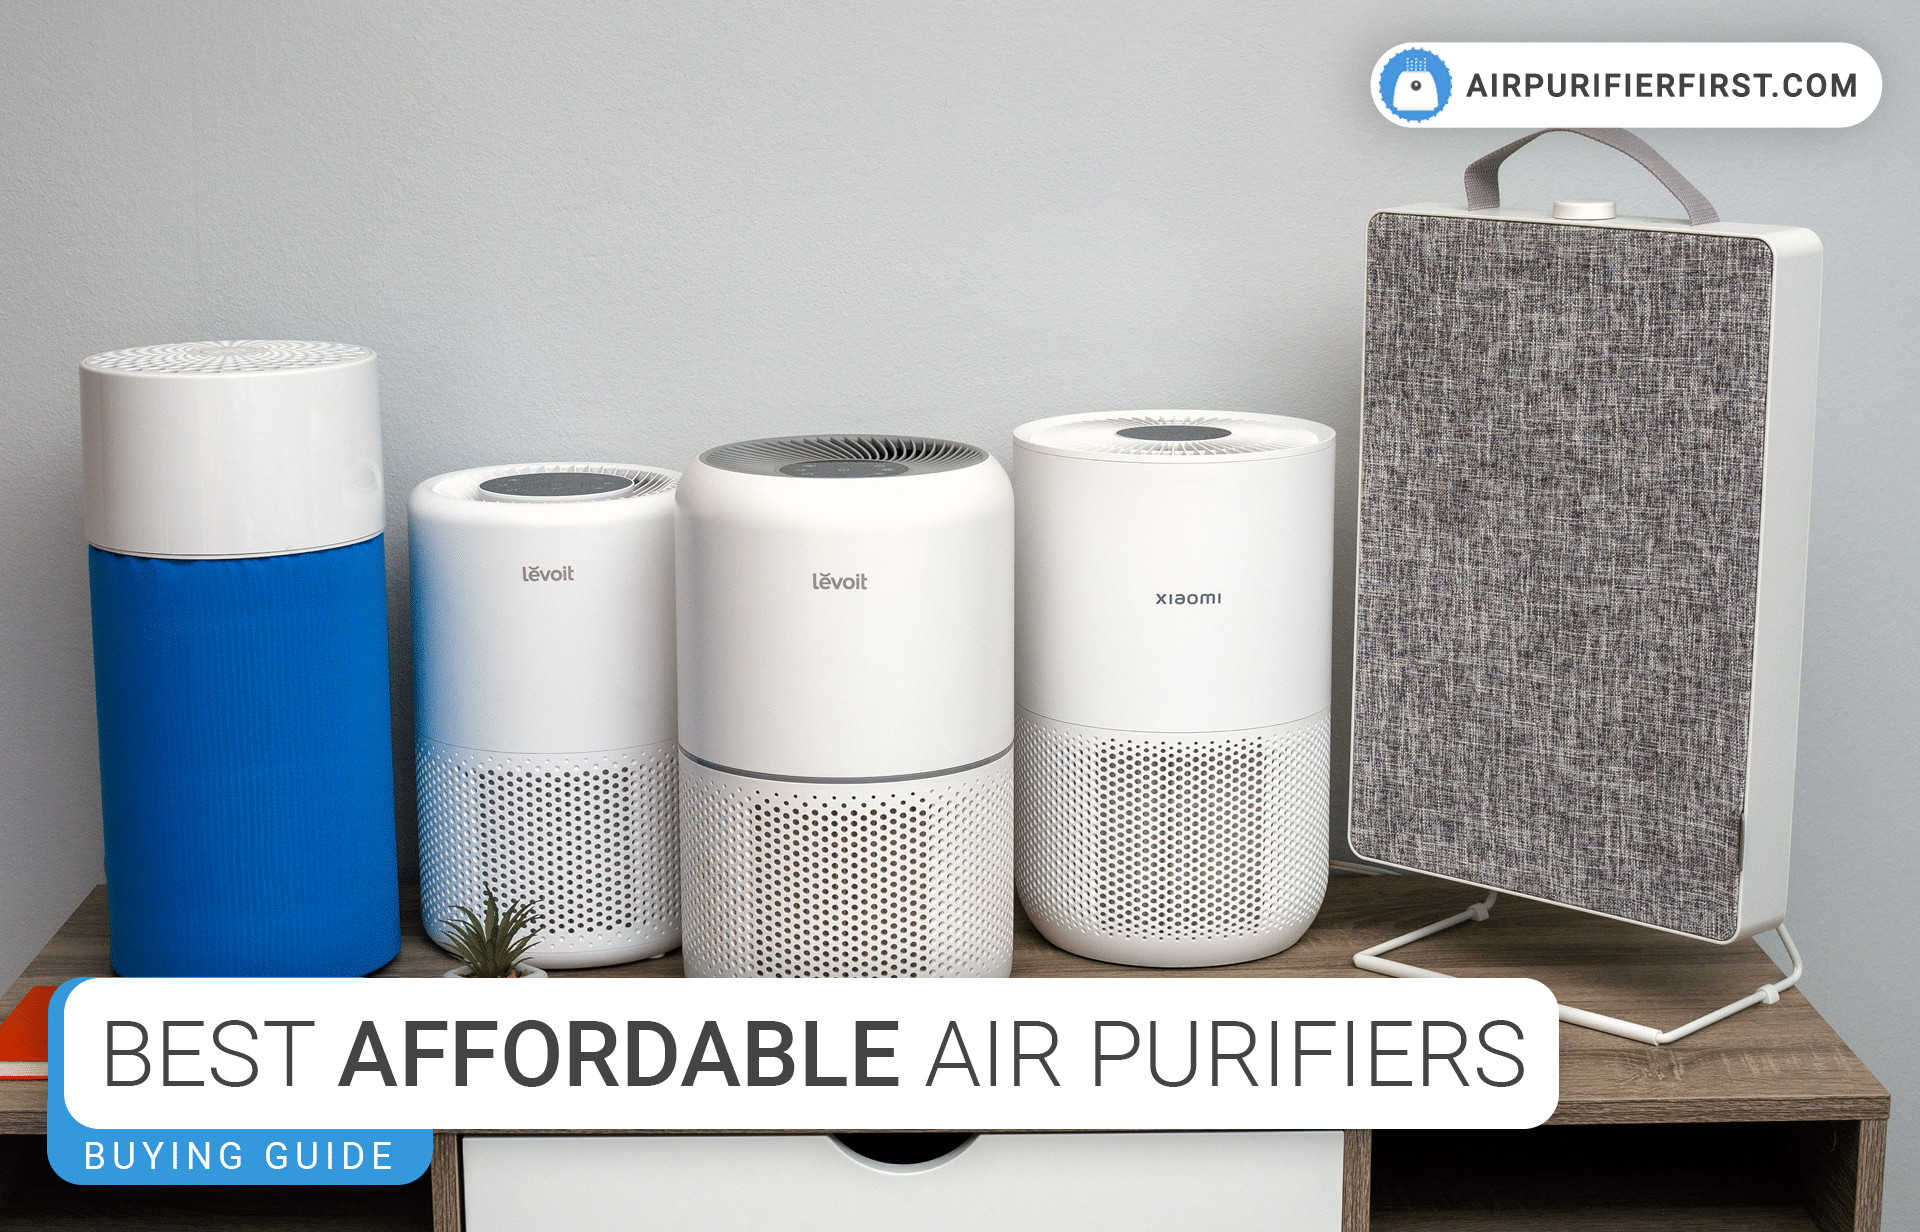 Best Affordable Air Purifiers - In-depth Guide